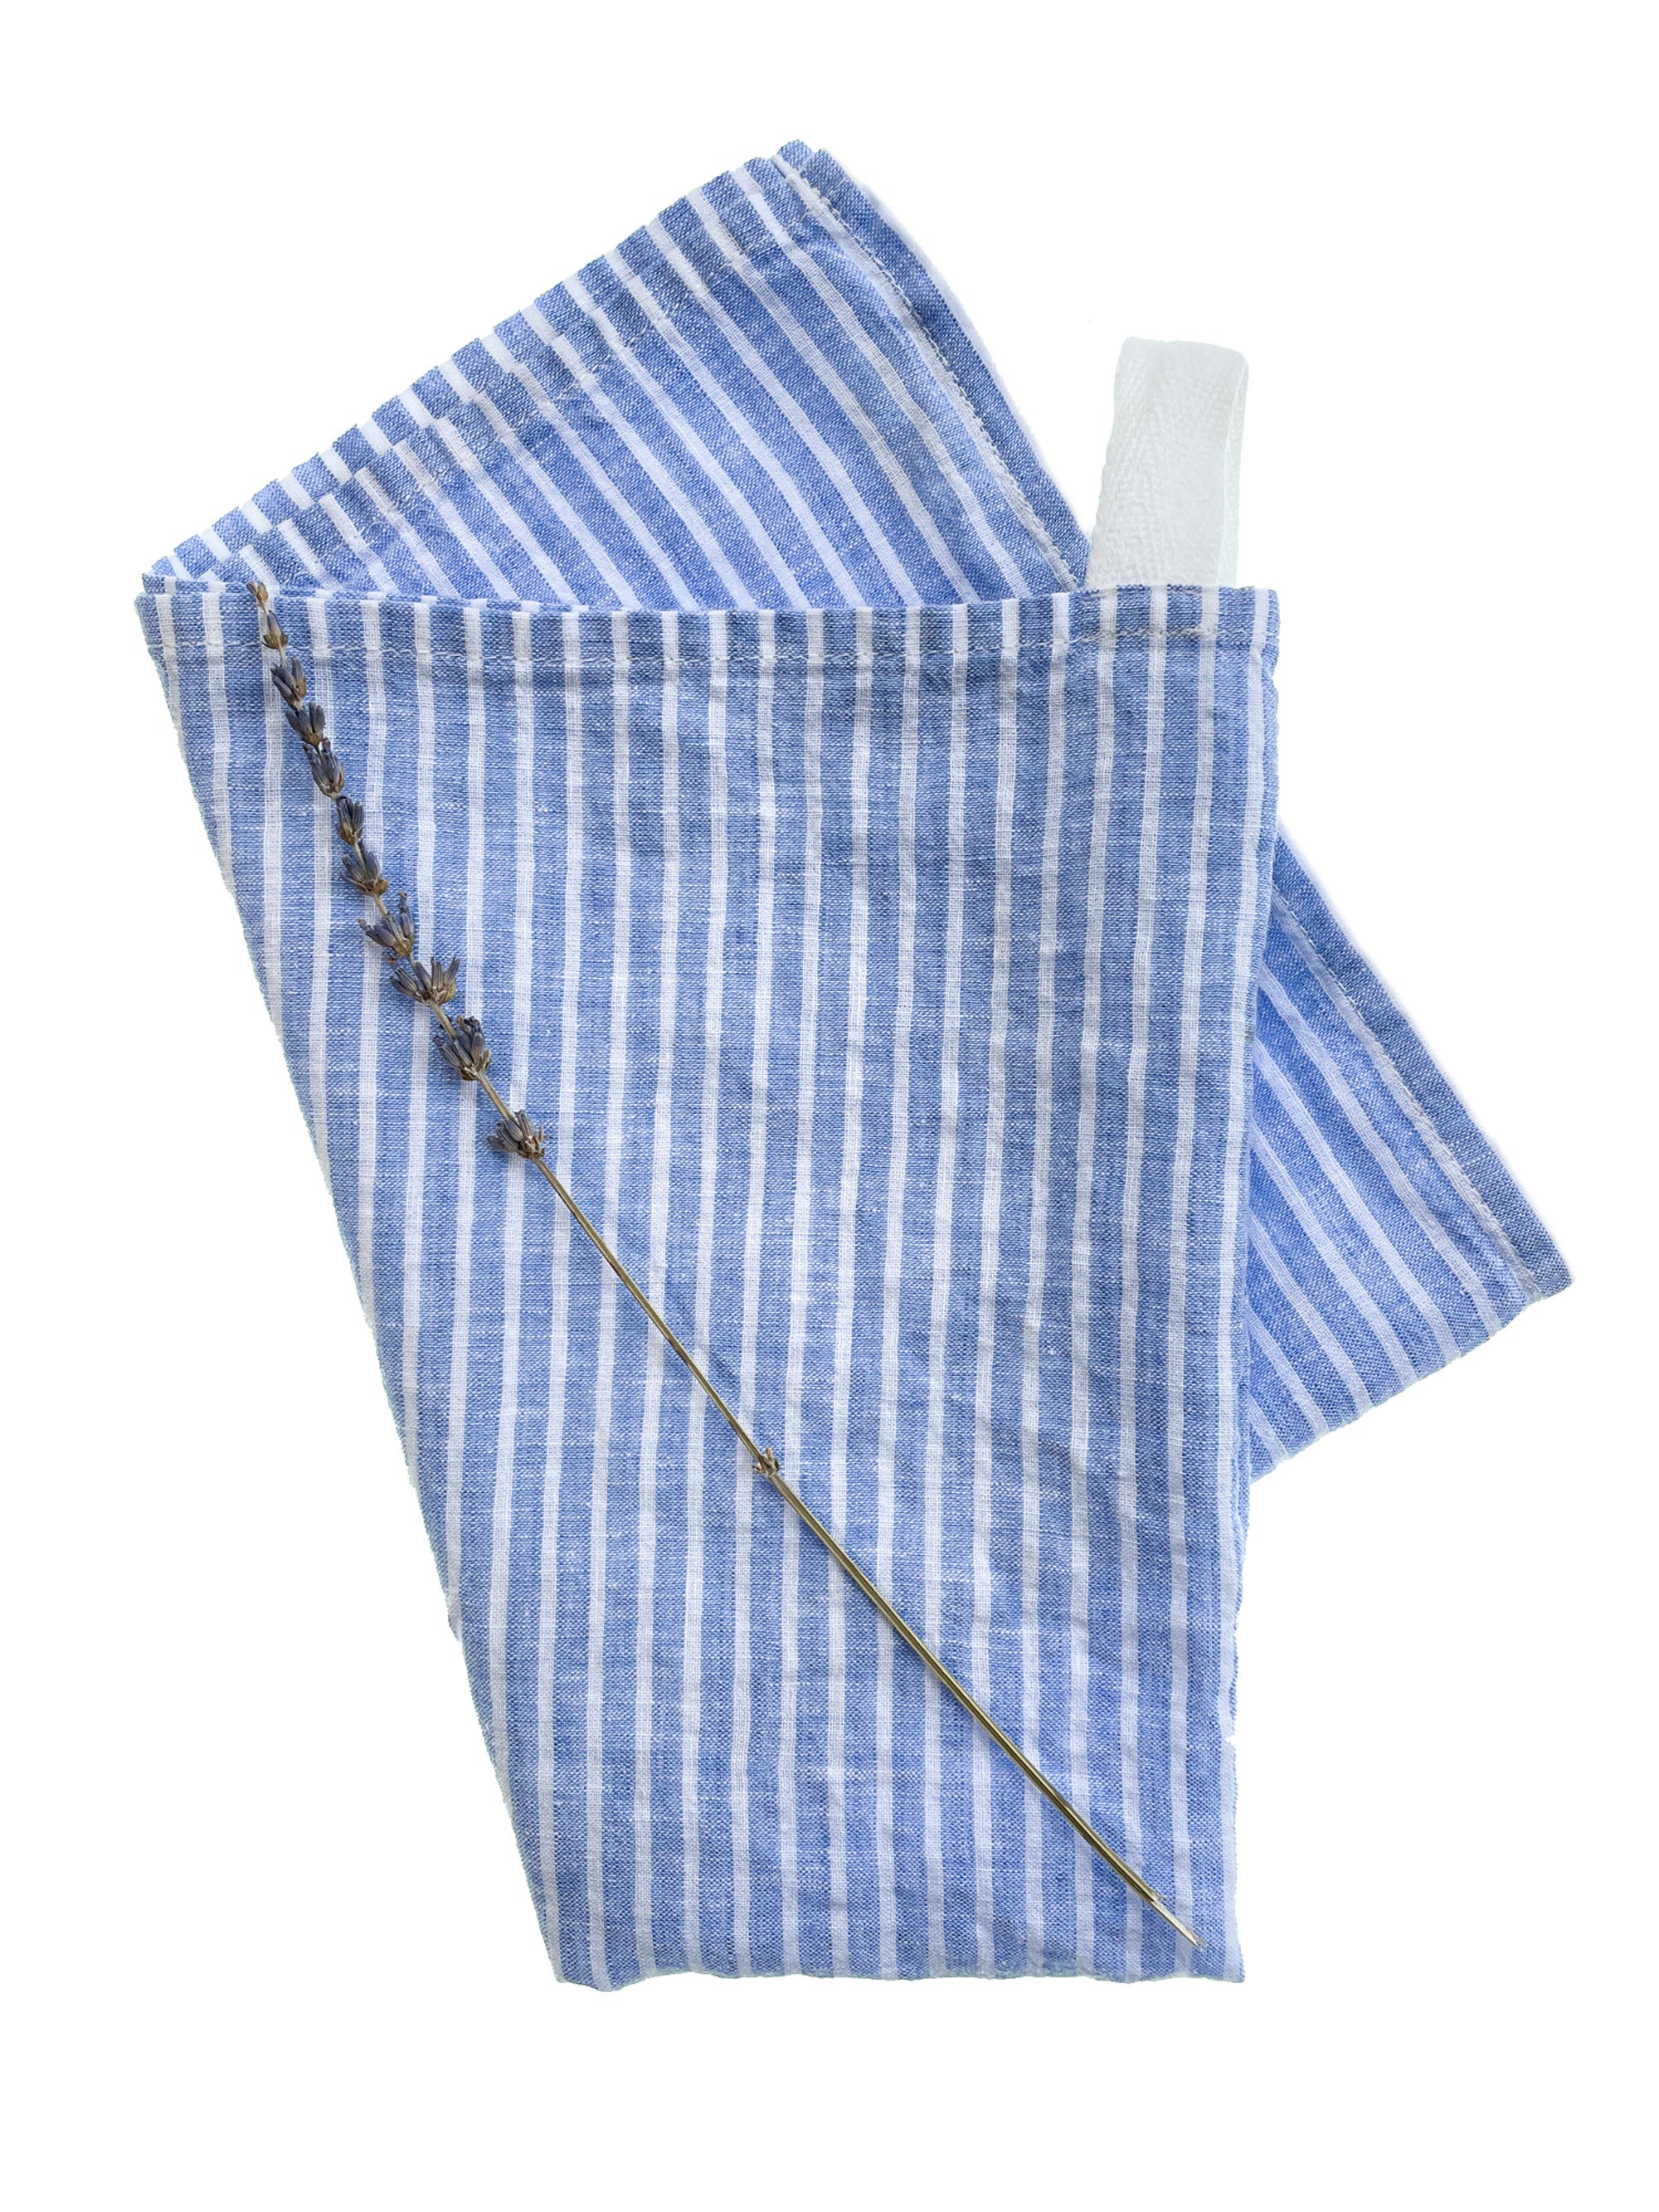 All Cotton and Linen Striped Dish Towels Rectangular BC Navy / 18x28 / Set of 4